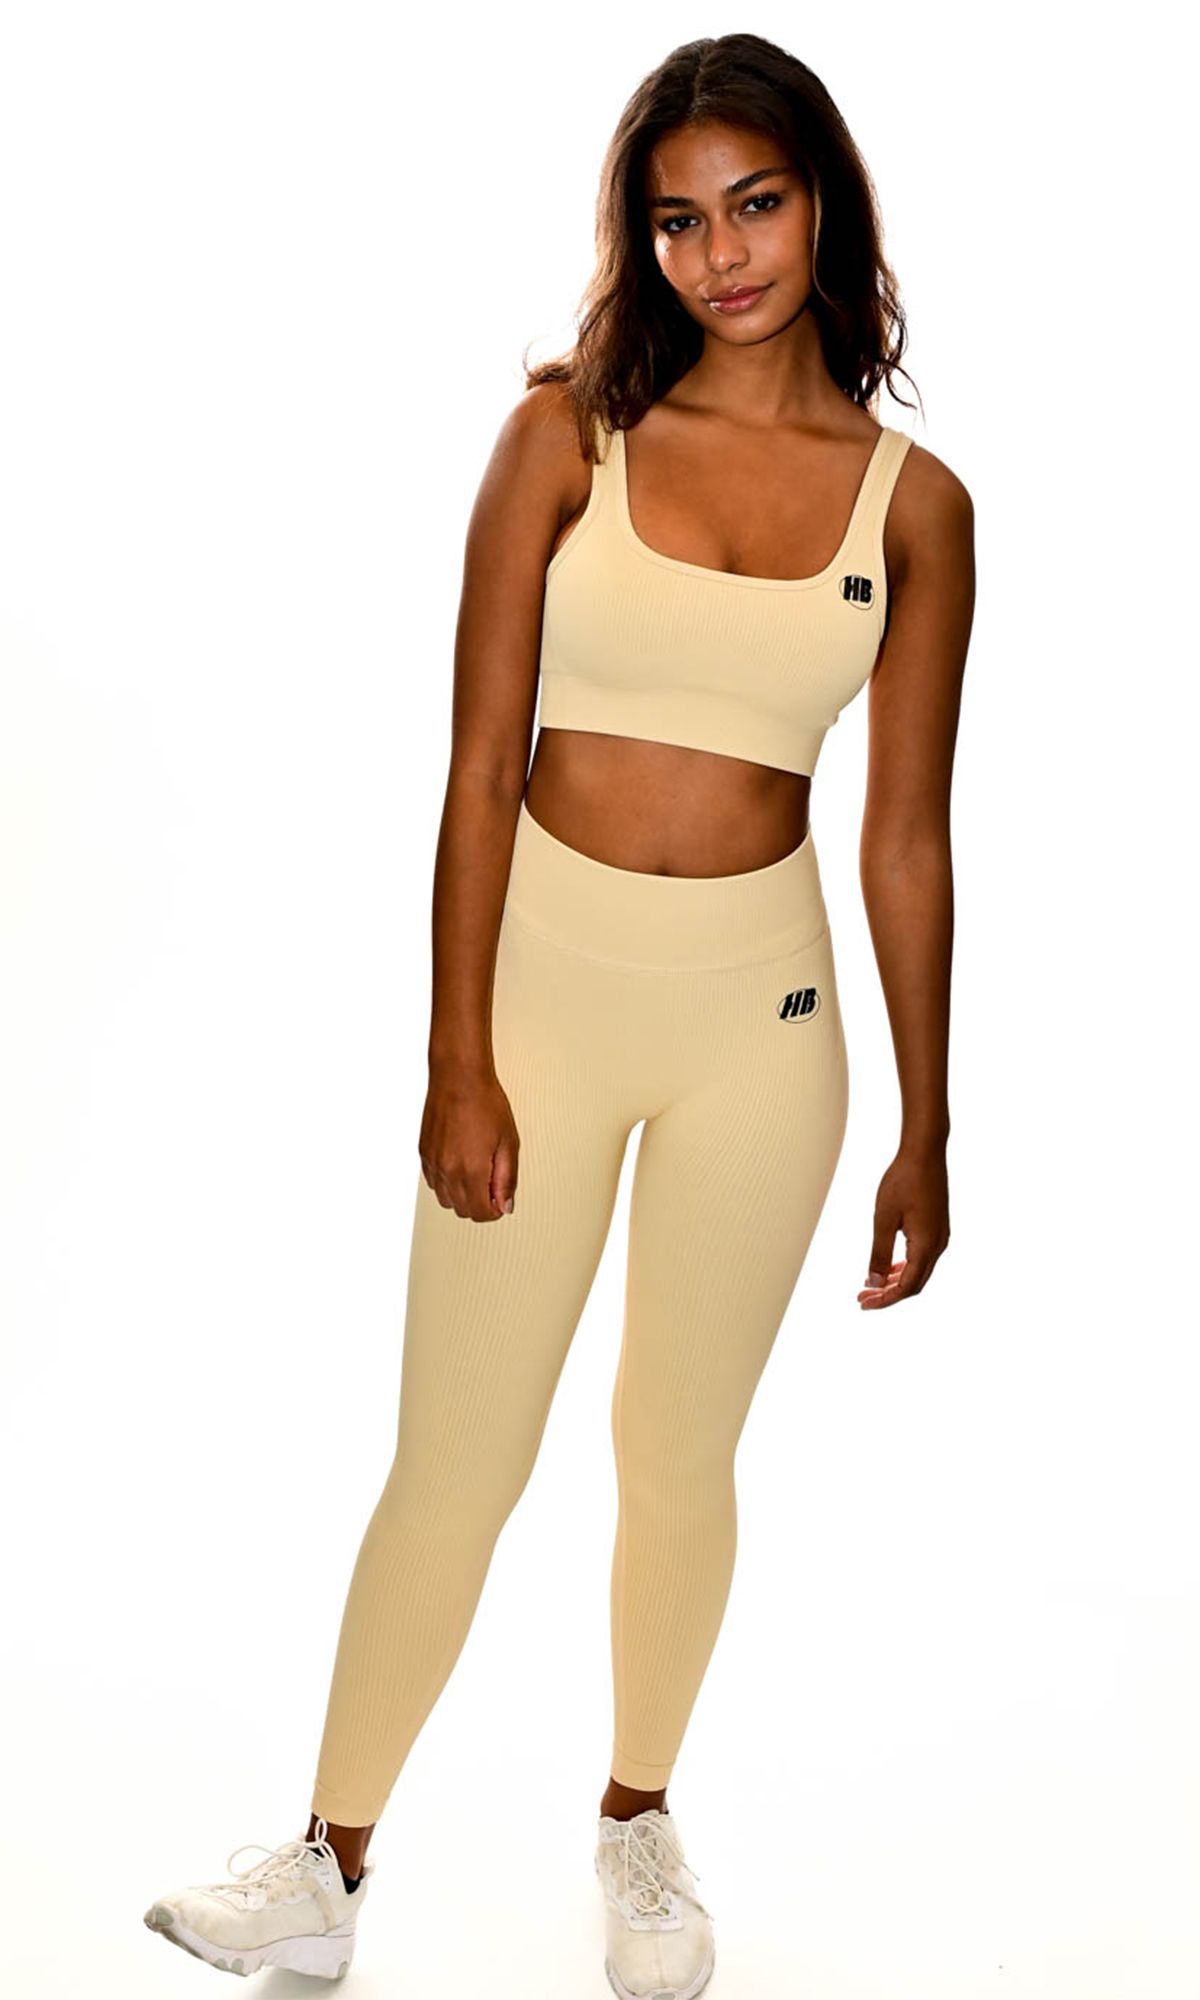 STRONG SPORTS BRA at HB Fight Gear